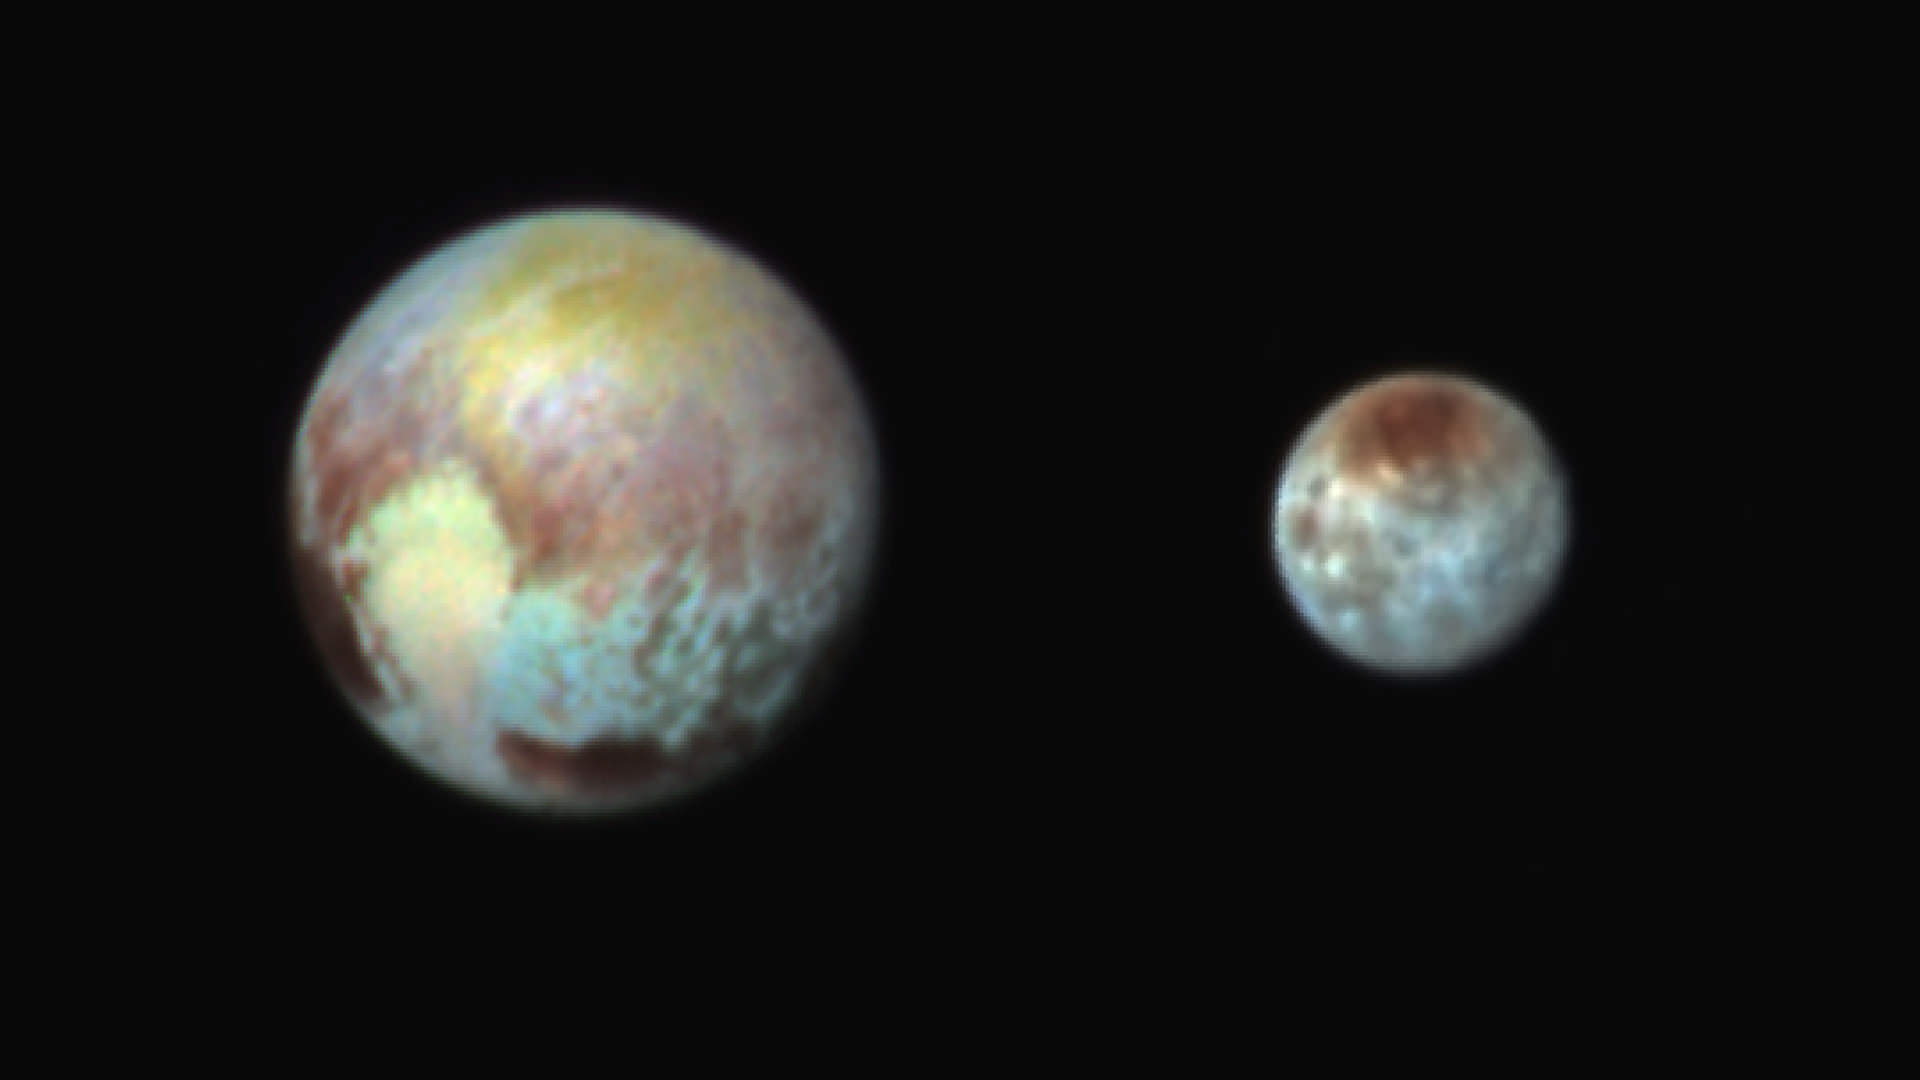 Pluto and Charon in False Color Show Compositional Diversity. This July 13, 2015, image of Pluto and Charon is presented in false colors to make differences in surface material and features easy to see. It was obtained by the Ralph instrument on NASA's New Horizons spacecraft, using three filters to obtain color information, which is exaggerated in the image.  These are not the actual colors of Pluto and Charon, and the apparent distance between the two bodies has been reduced for this side-by-side view.   Credit: NASA/APL/SwRI